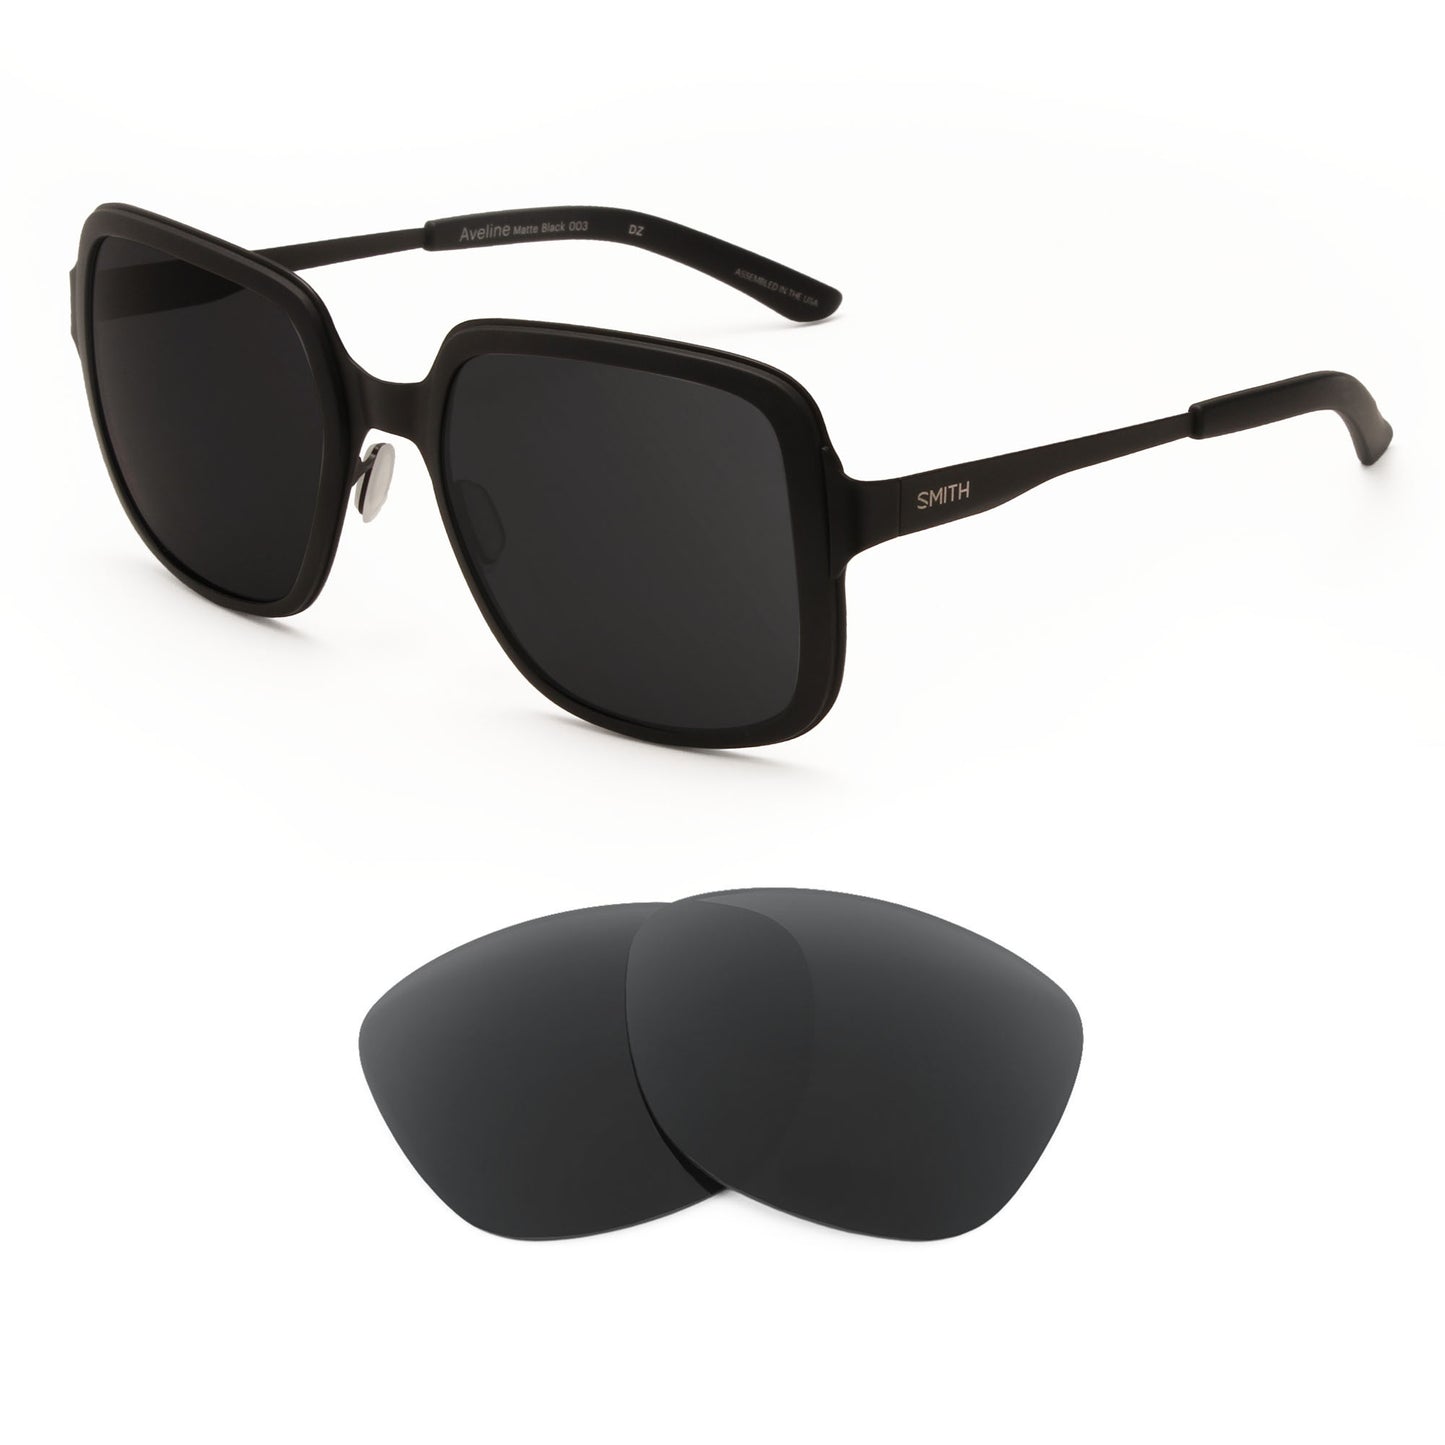 Smith Aveline sunglasses with replacement lenses